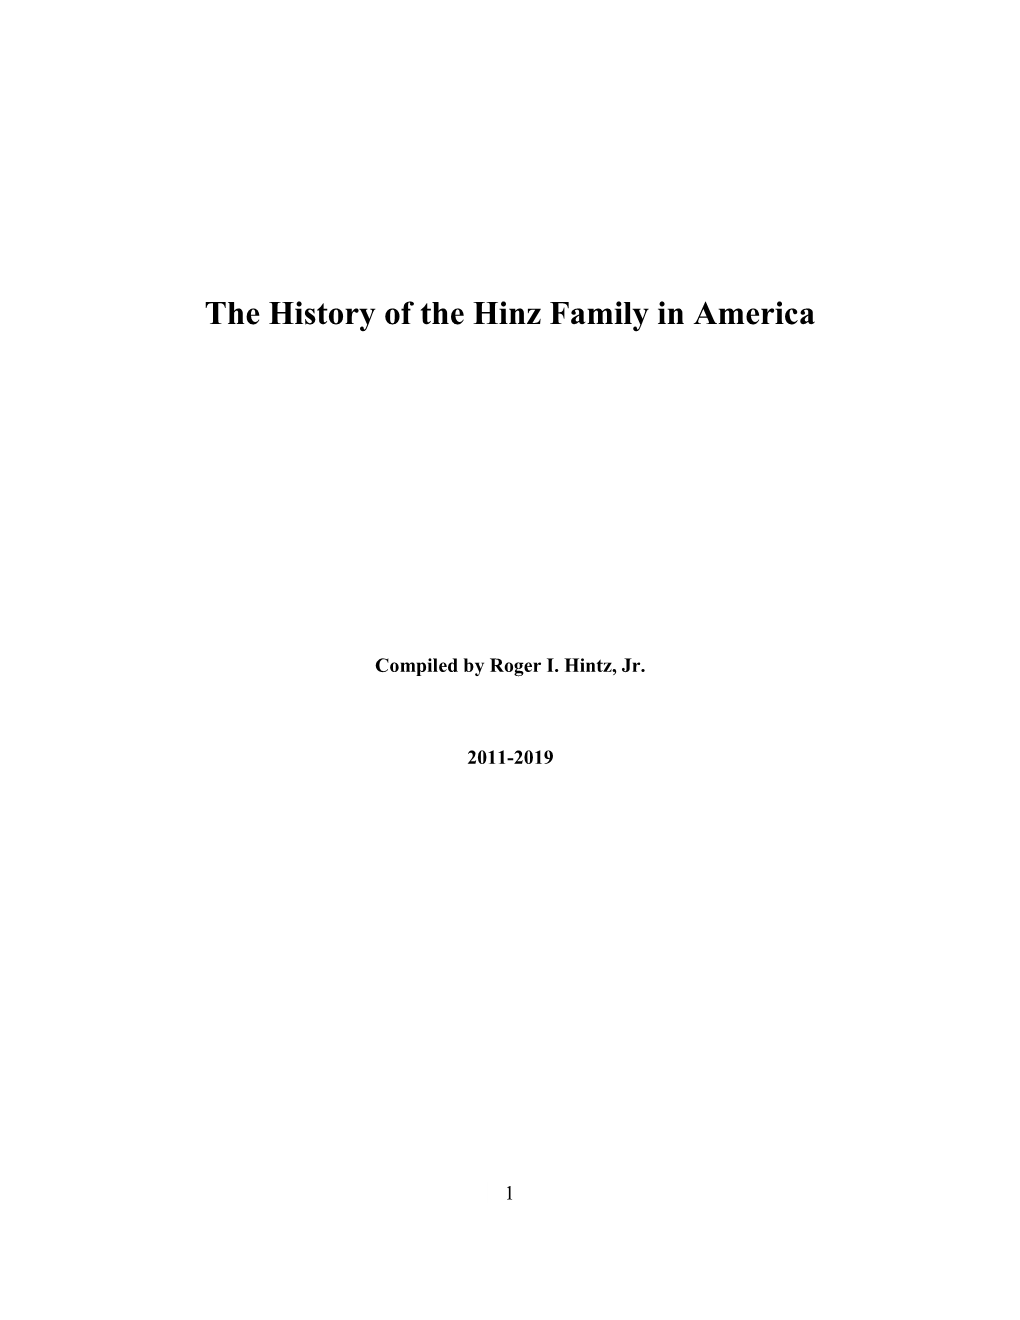 The History of the Hinz Family in America